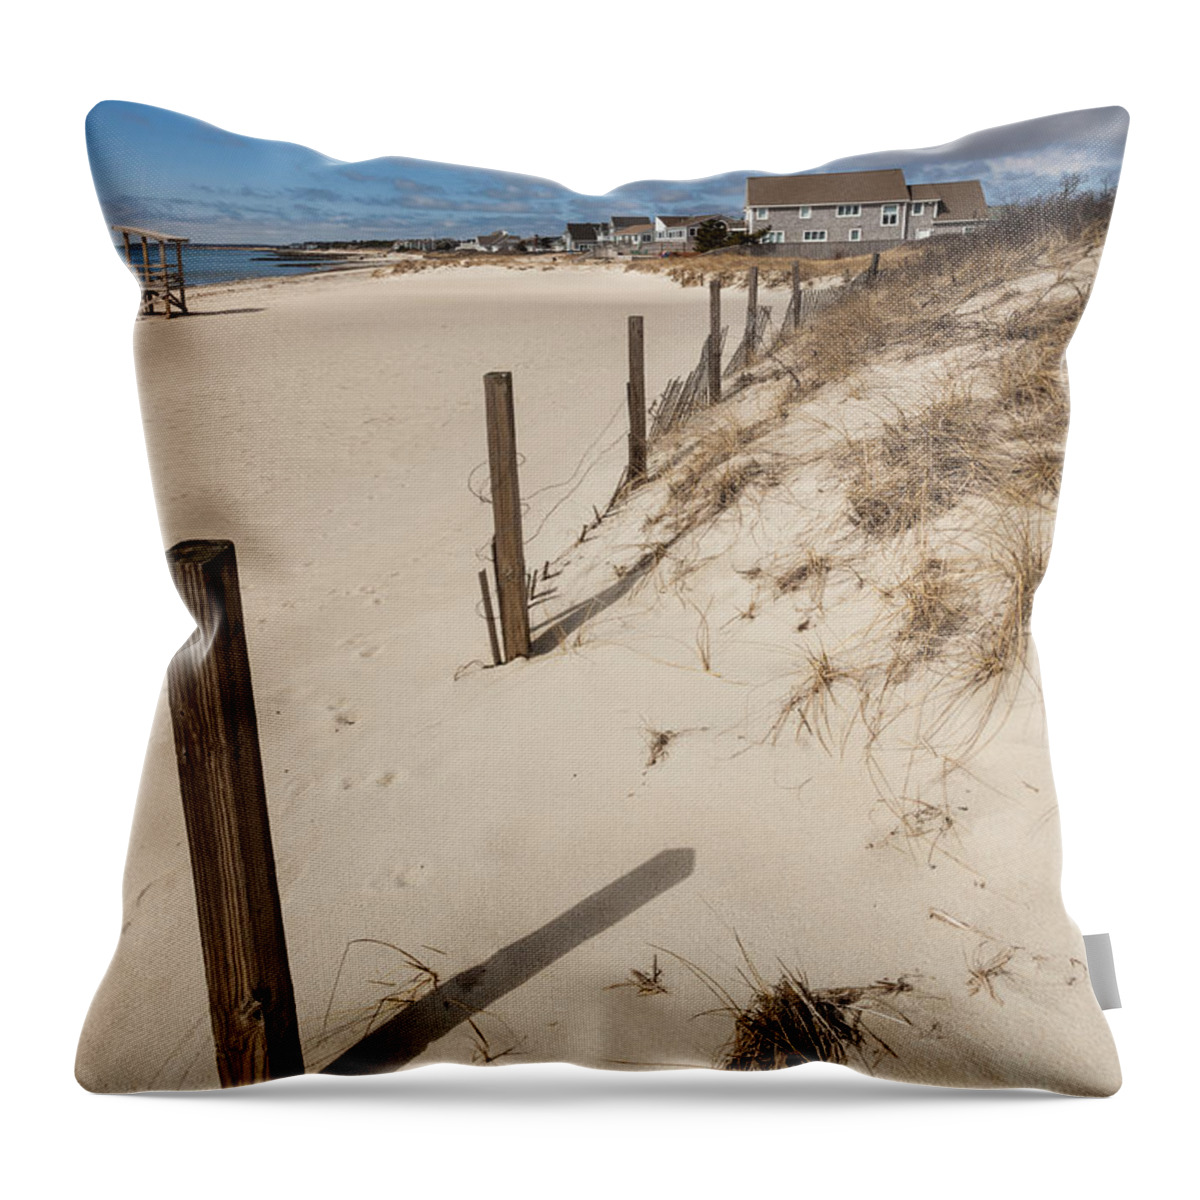 Springtime Saturday Morning Throw Pillow featuring the photograph Springtime Saturday Morning at the Beach by Michelle Constantine